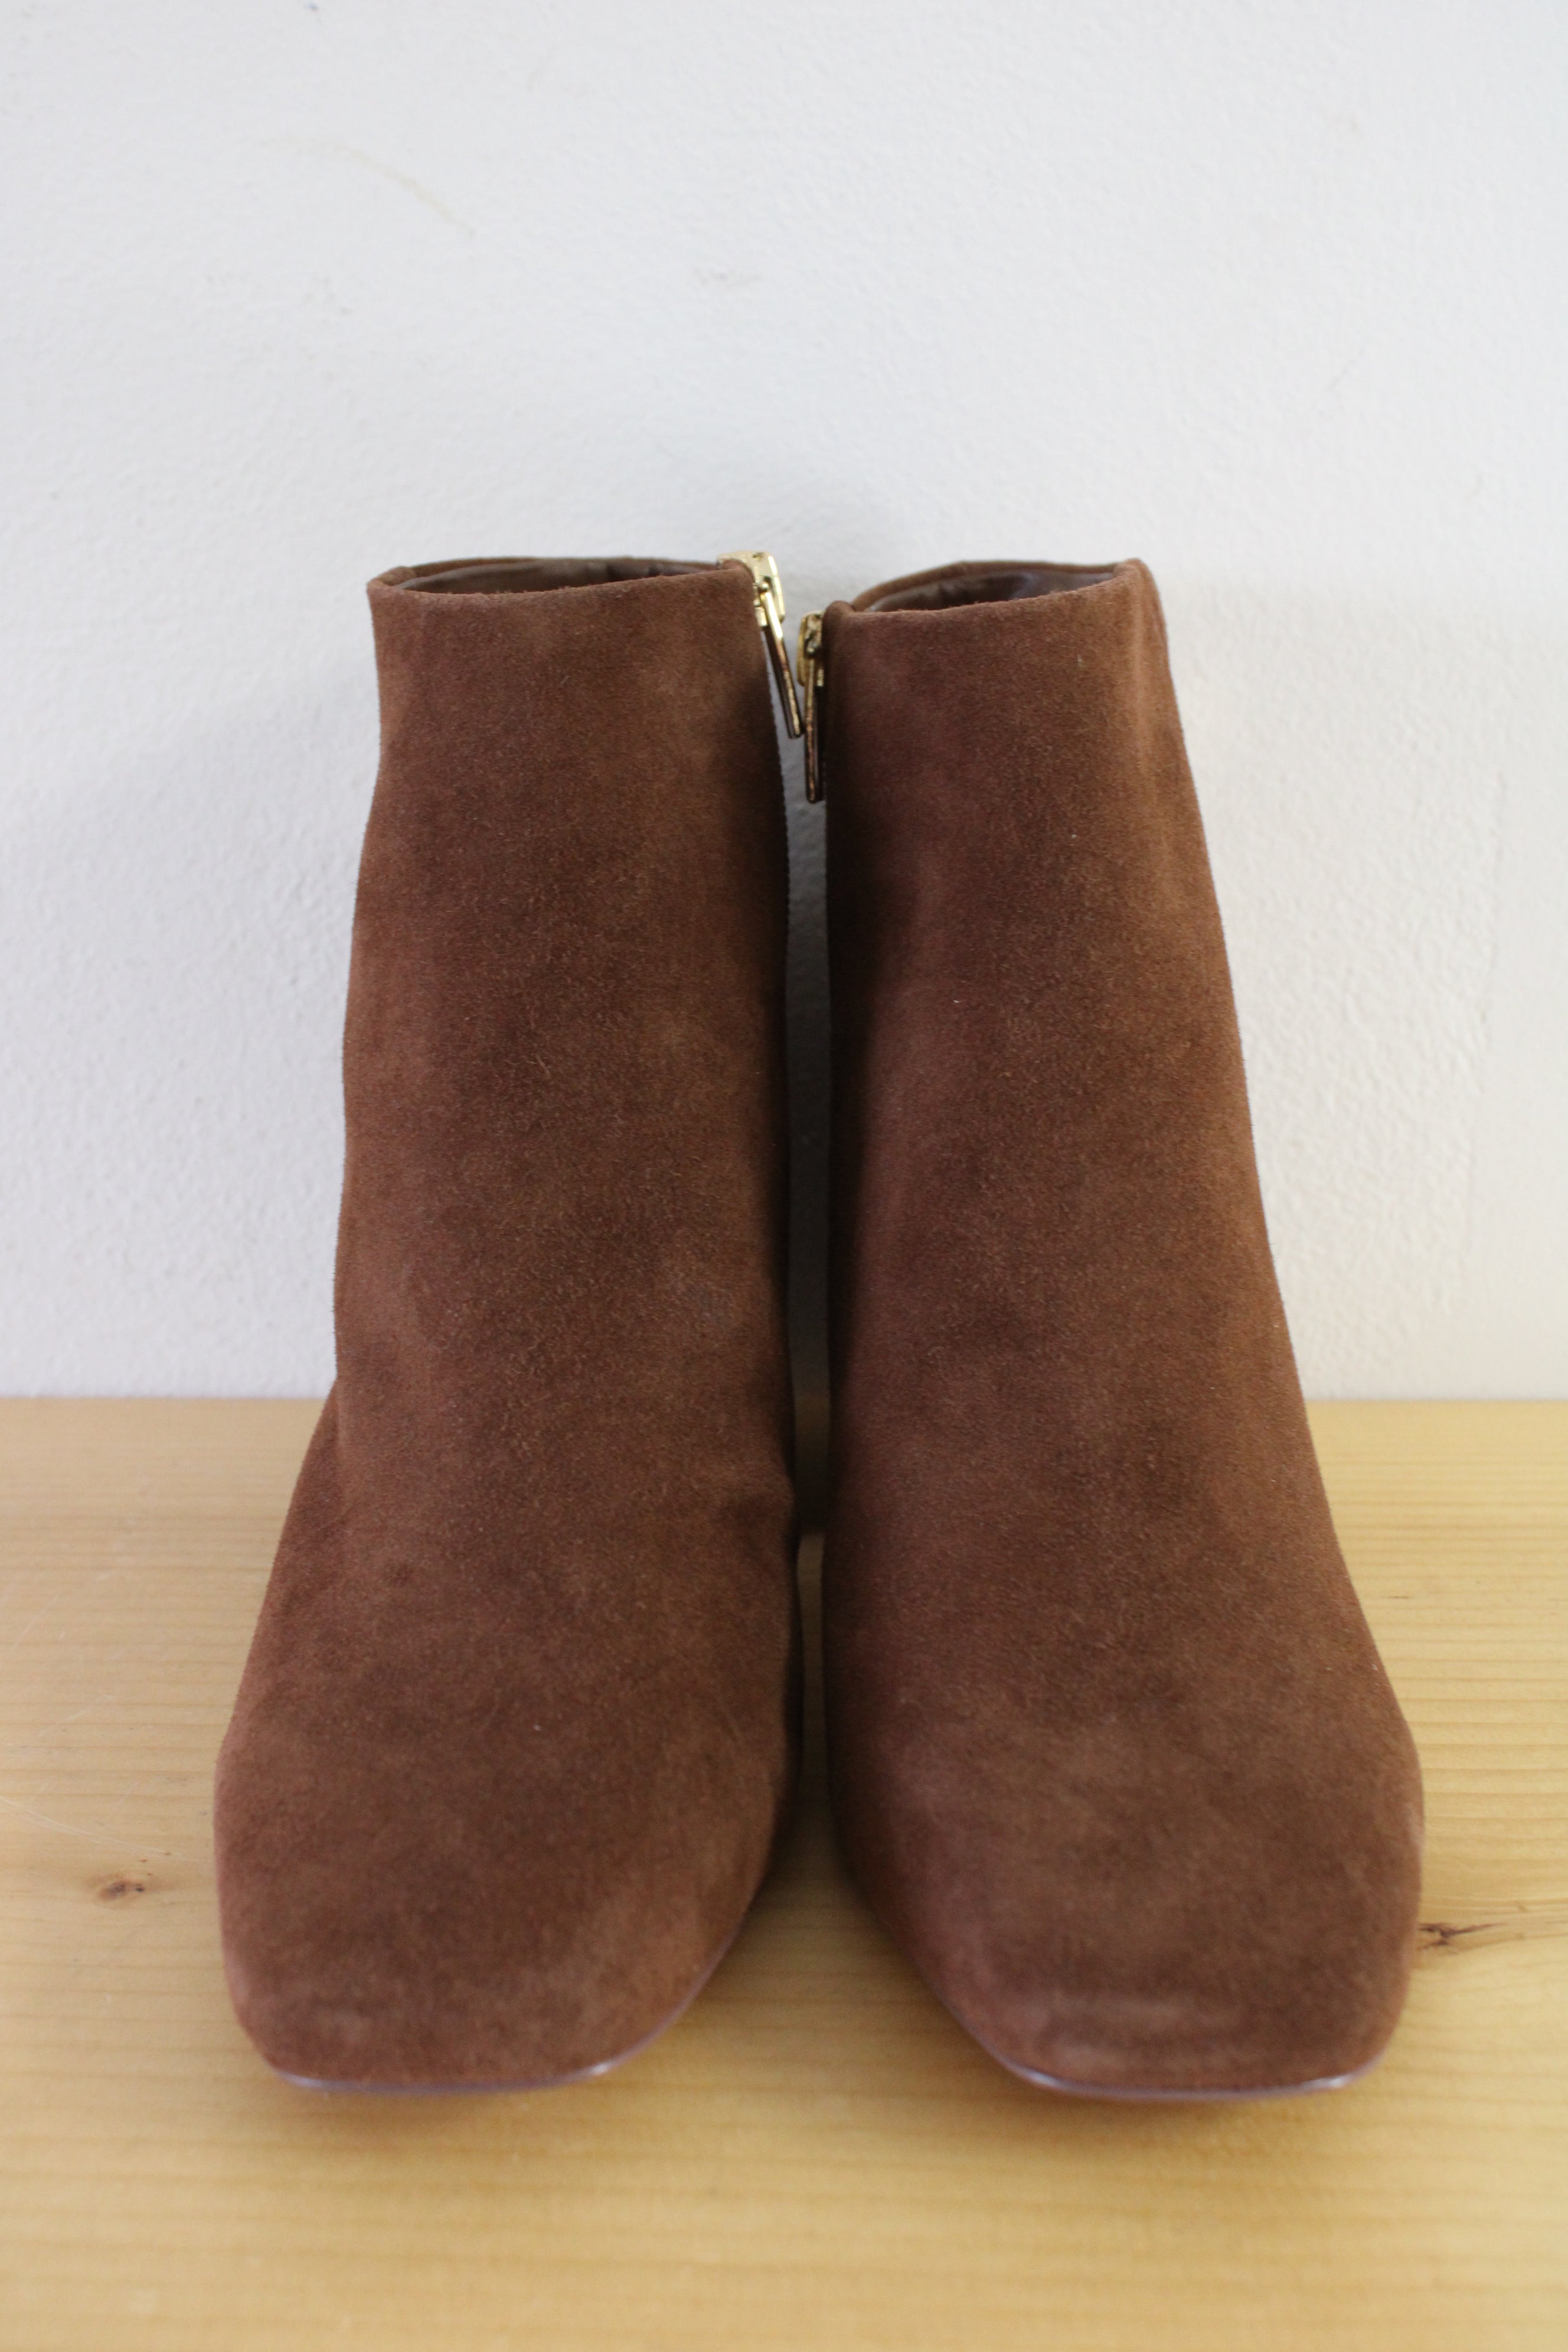 NEW Vince Camuto Suede Brown Ankle Heel Boots | Size 7.5